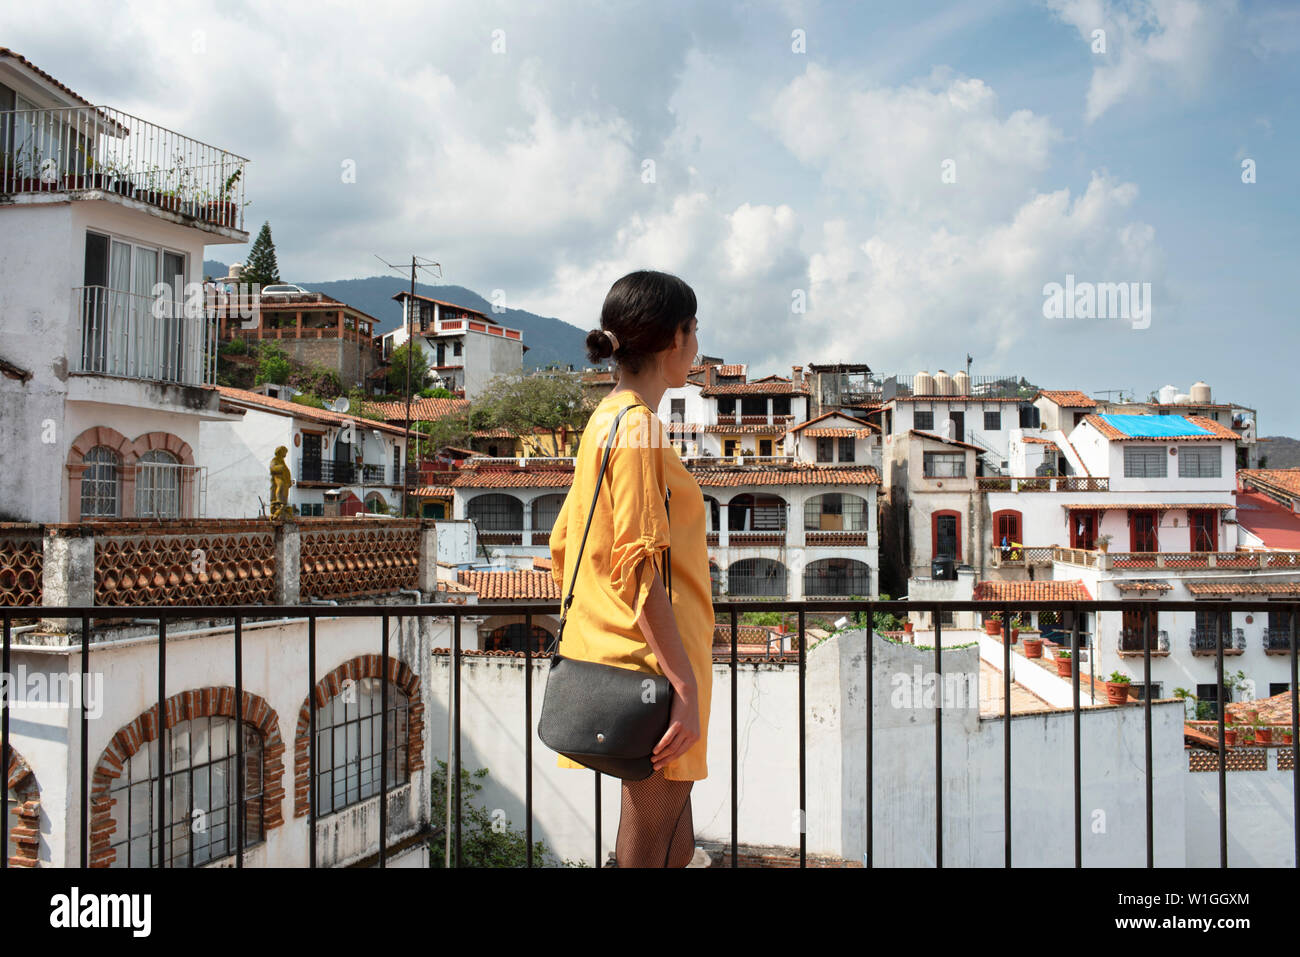 Rear view of latina girl overlooking the scenic town scape of white houses. Sightseeing in Taxco, Guerrero State, Mexico. Jun 2019 Stock Photo